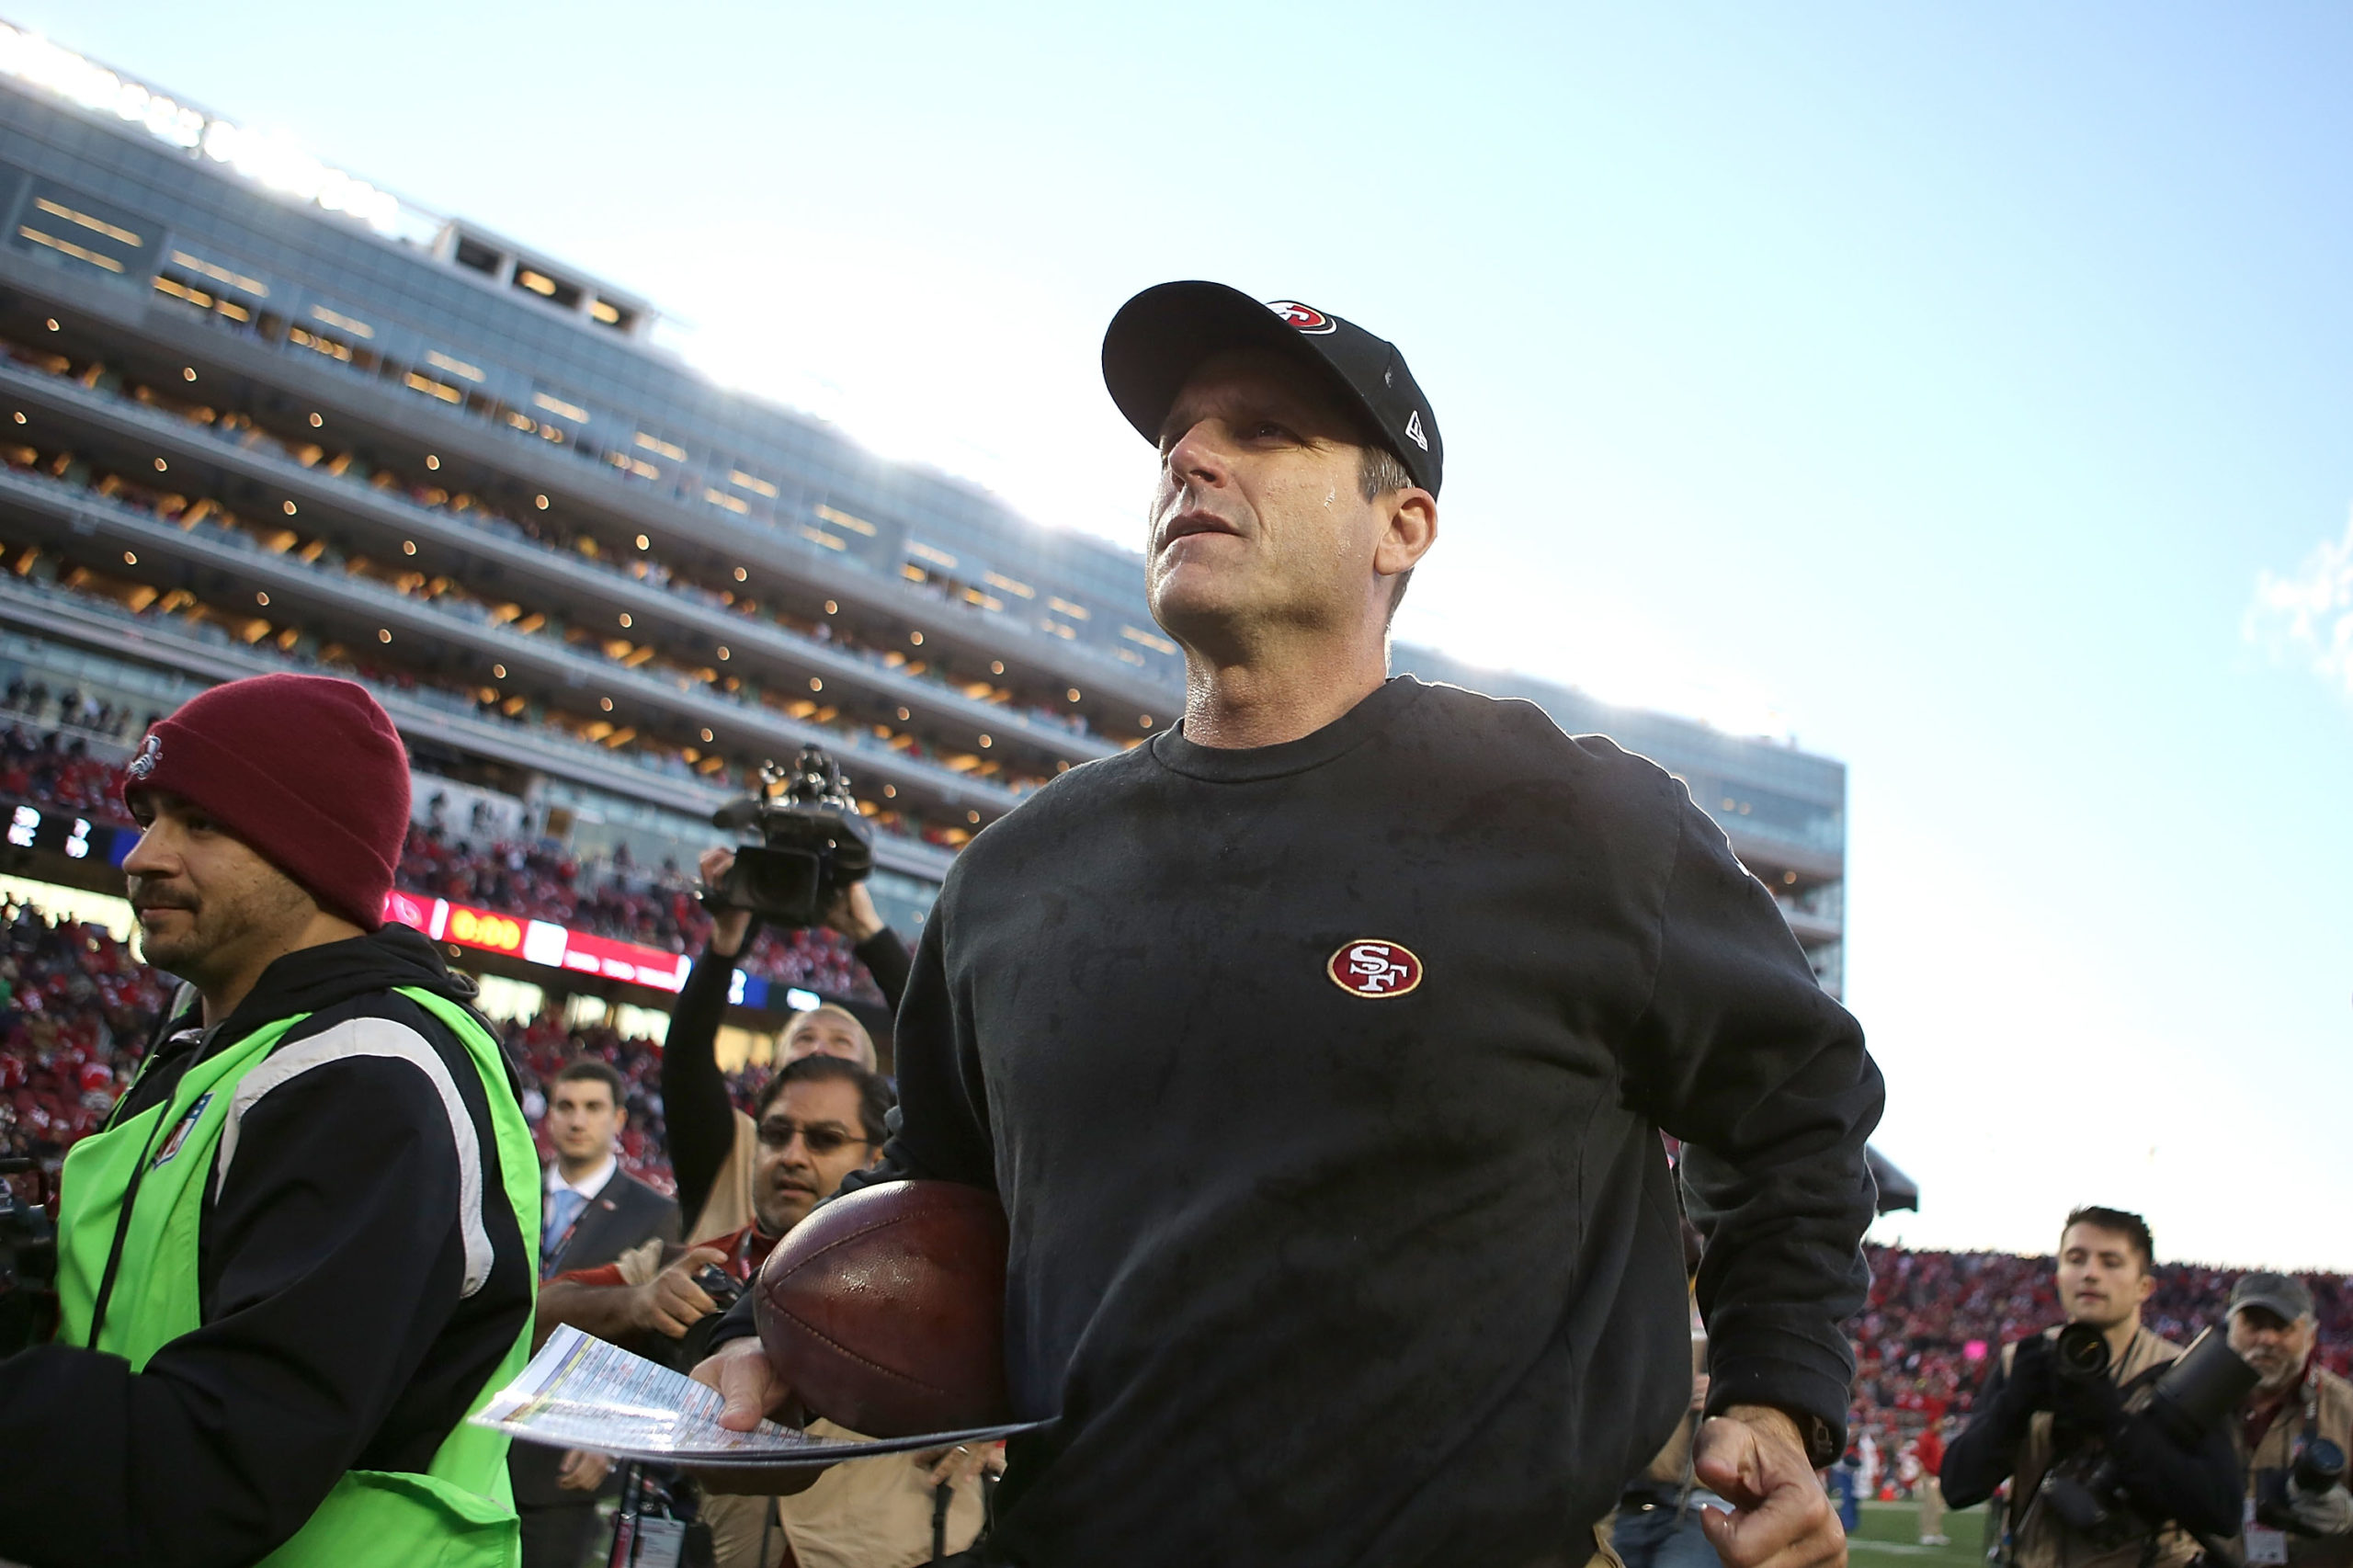 SANTA CLARA, CA - DECEMBER 28: head coach Jim Harbaugh of the San Francisco 49ers leaves the field after their win over the Arizona Cardinals at Levi's Stadium on December 28, 2014 in Santa Clara, California. Don Feria/Getty Images